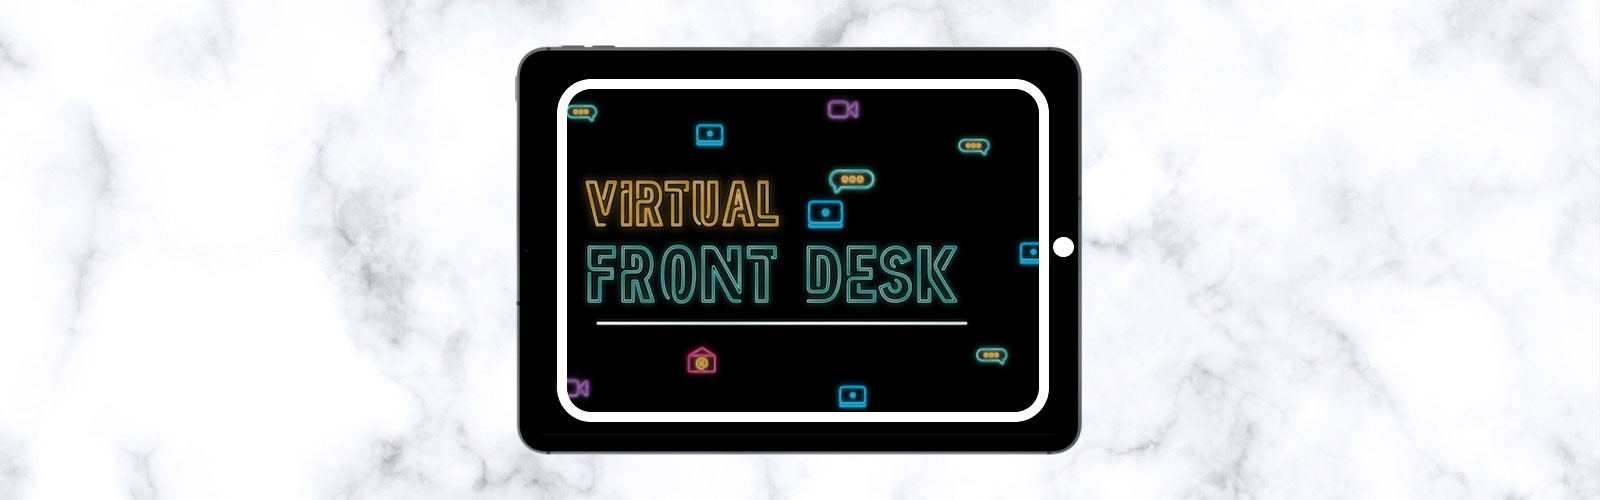 Image of Virtual Front Desk neon logo on an ipad